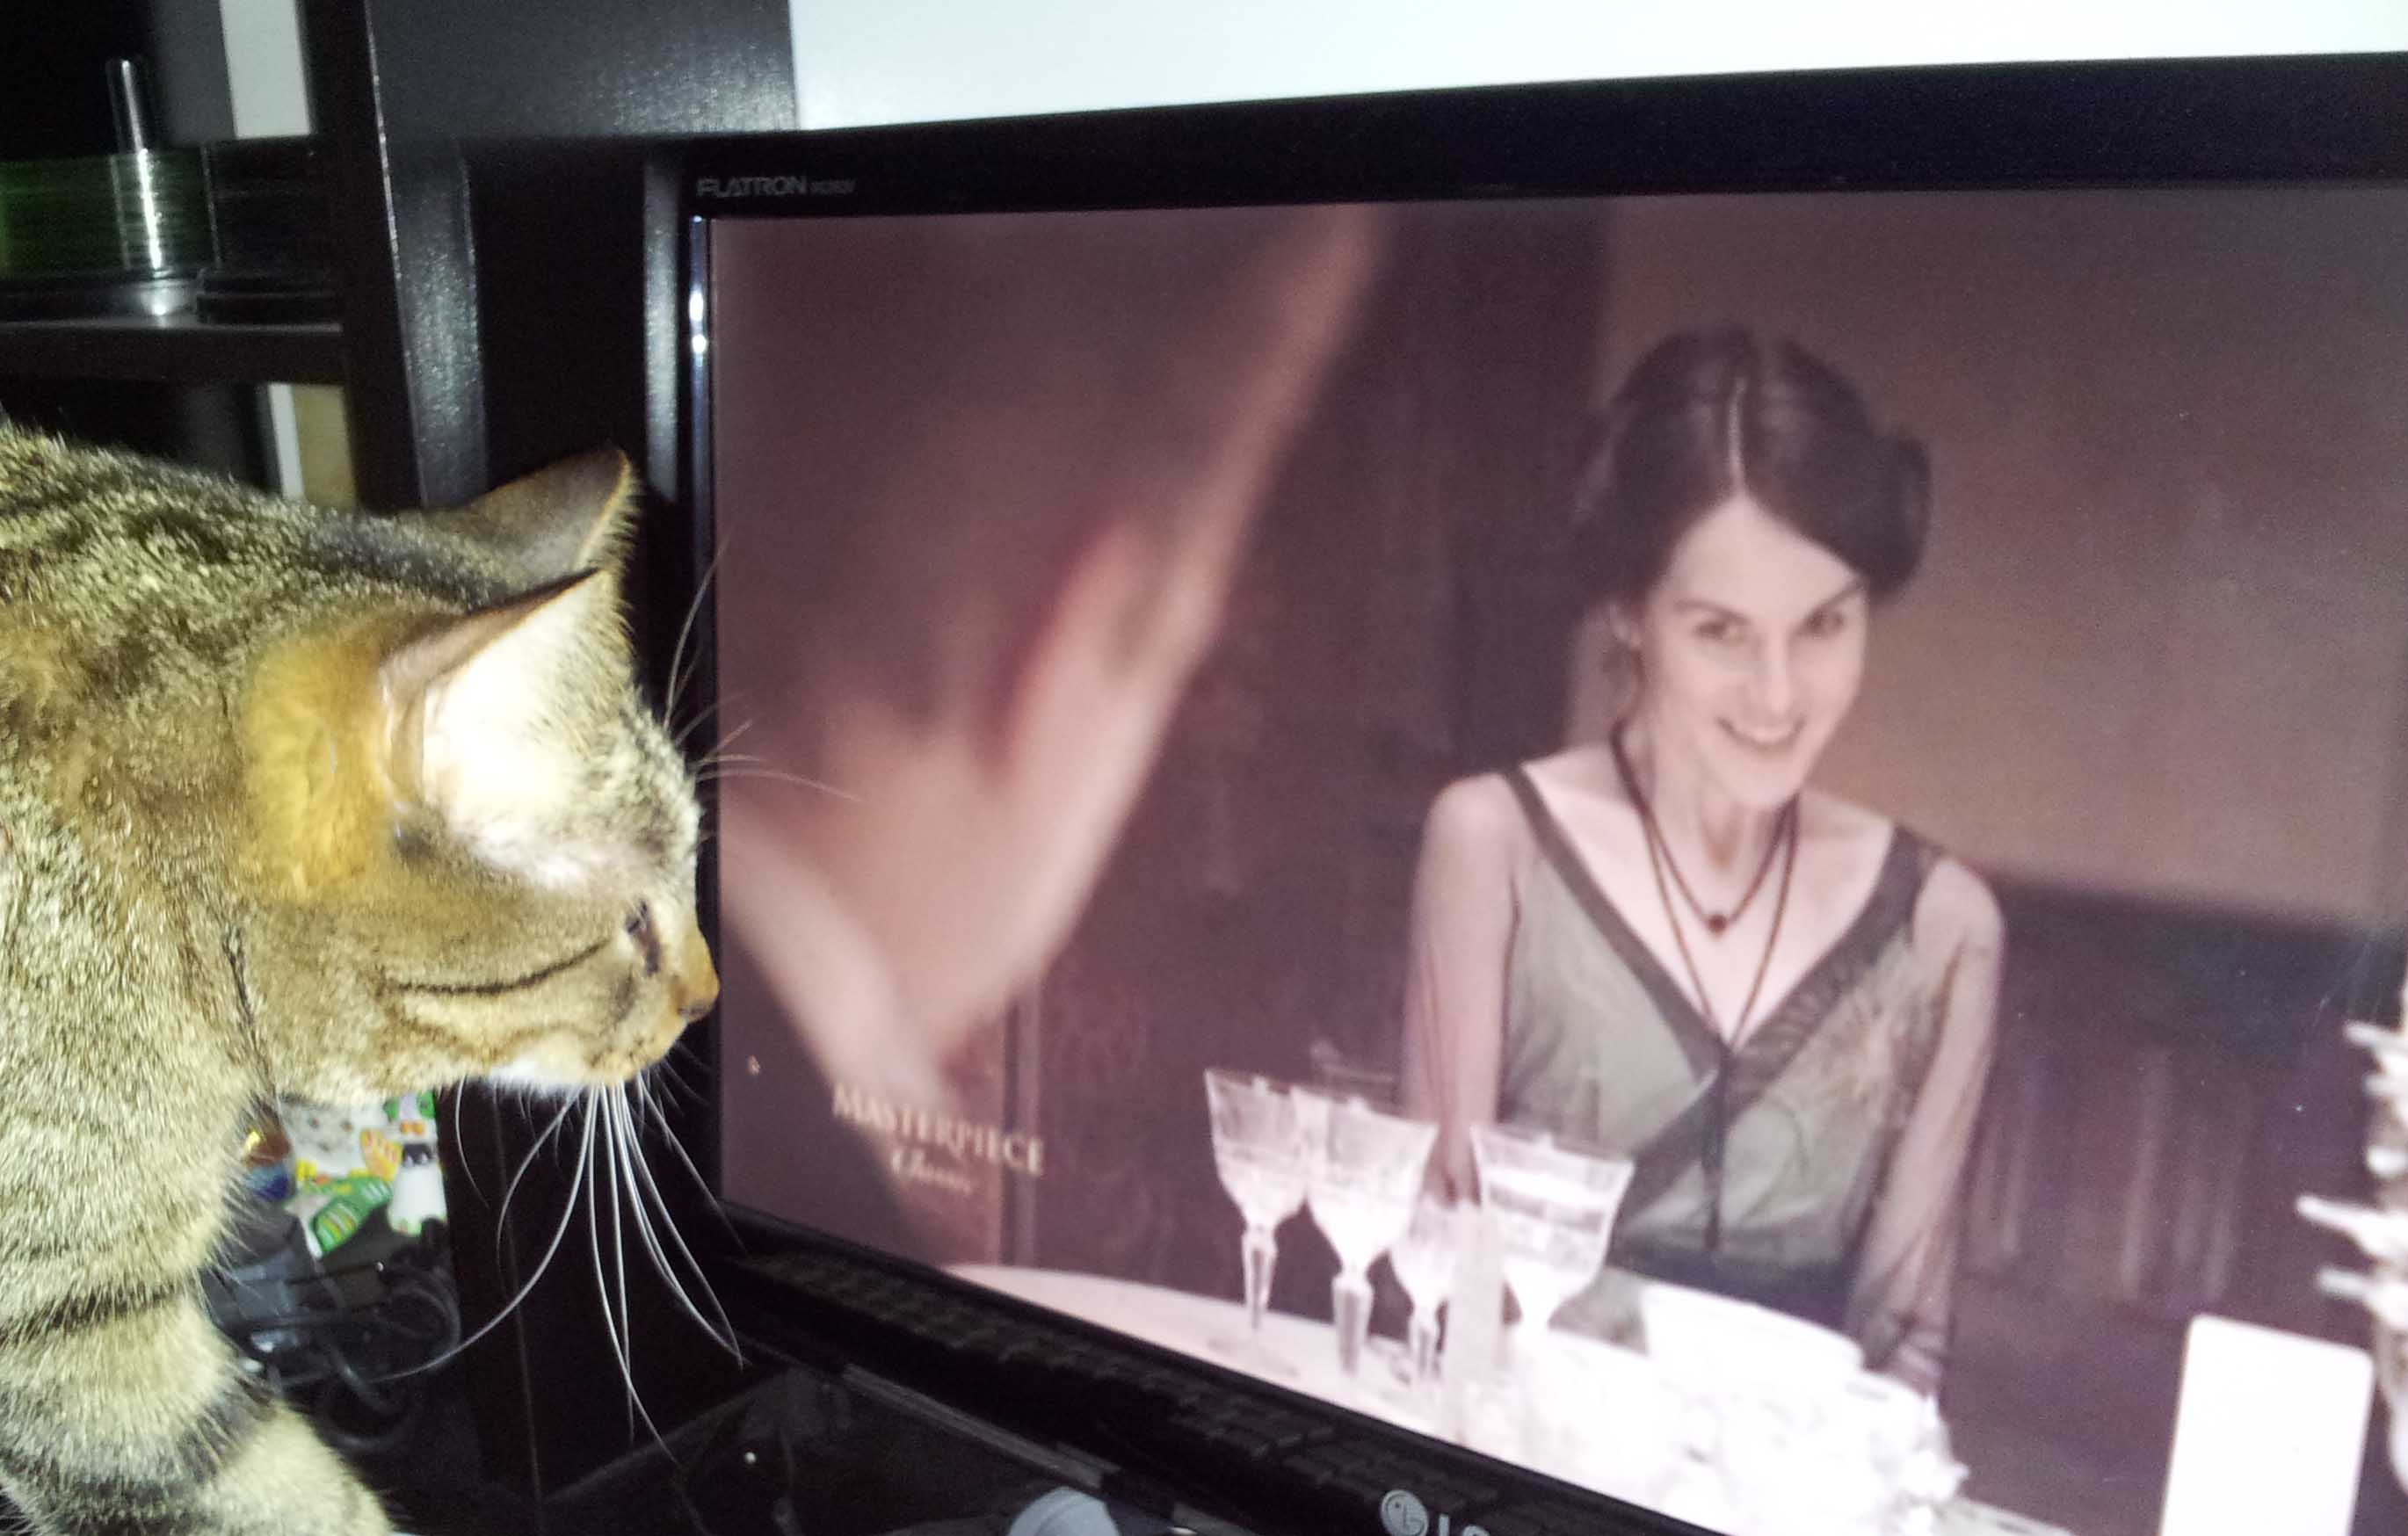 Crepes watching Downton Abbey